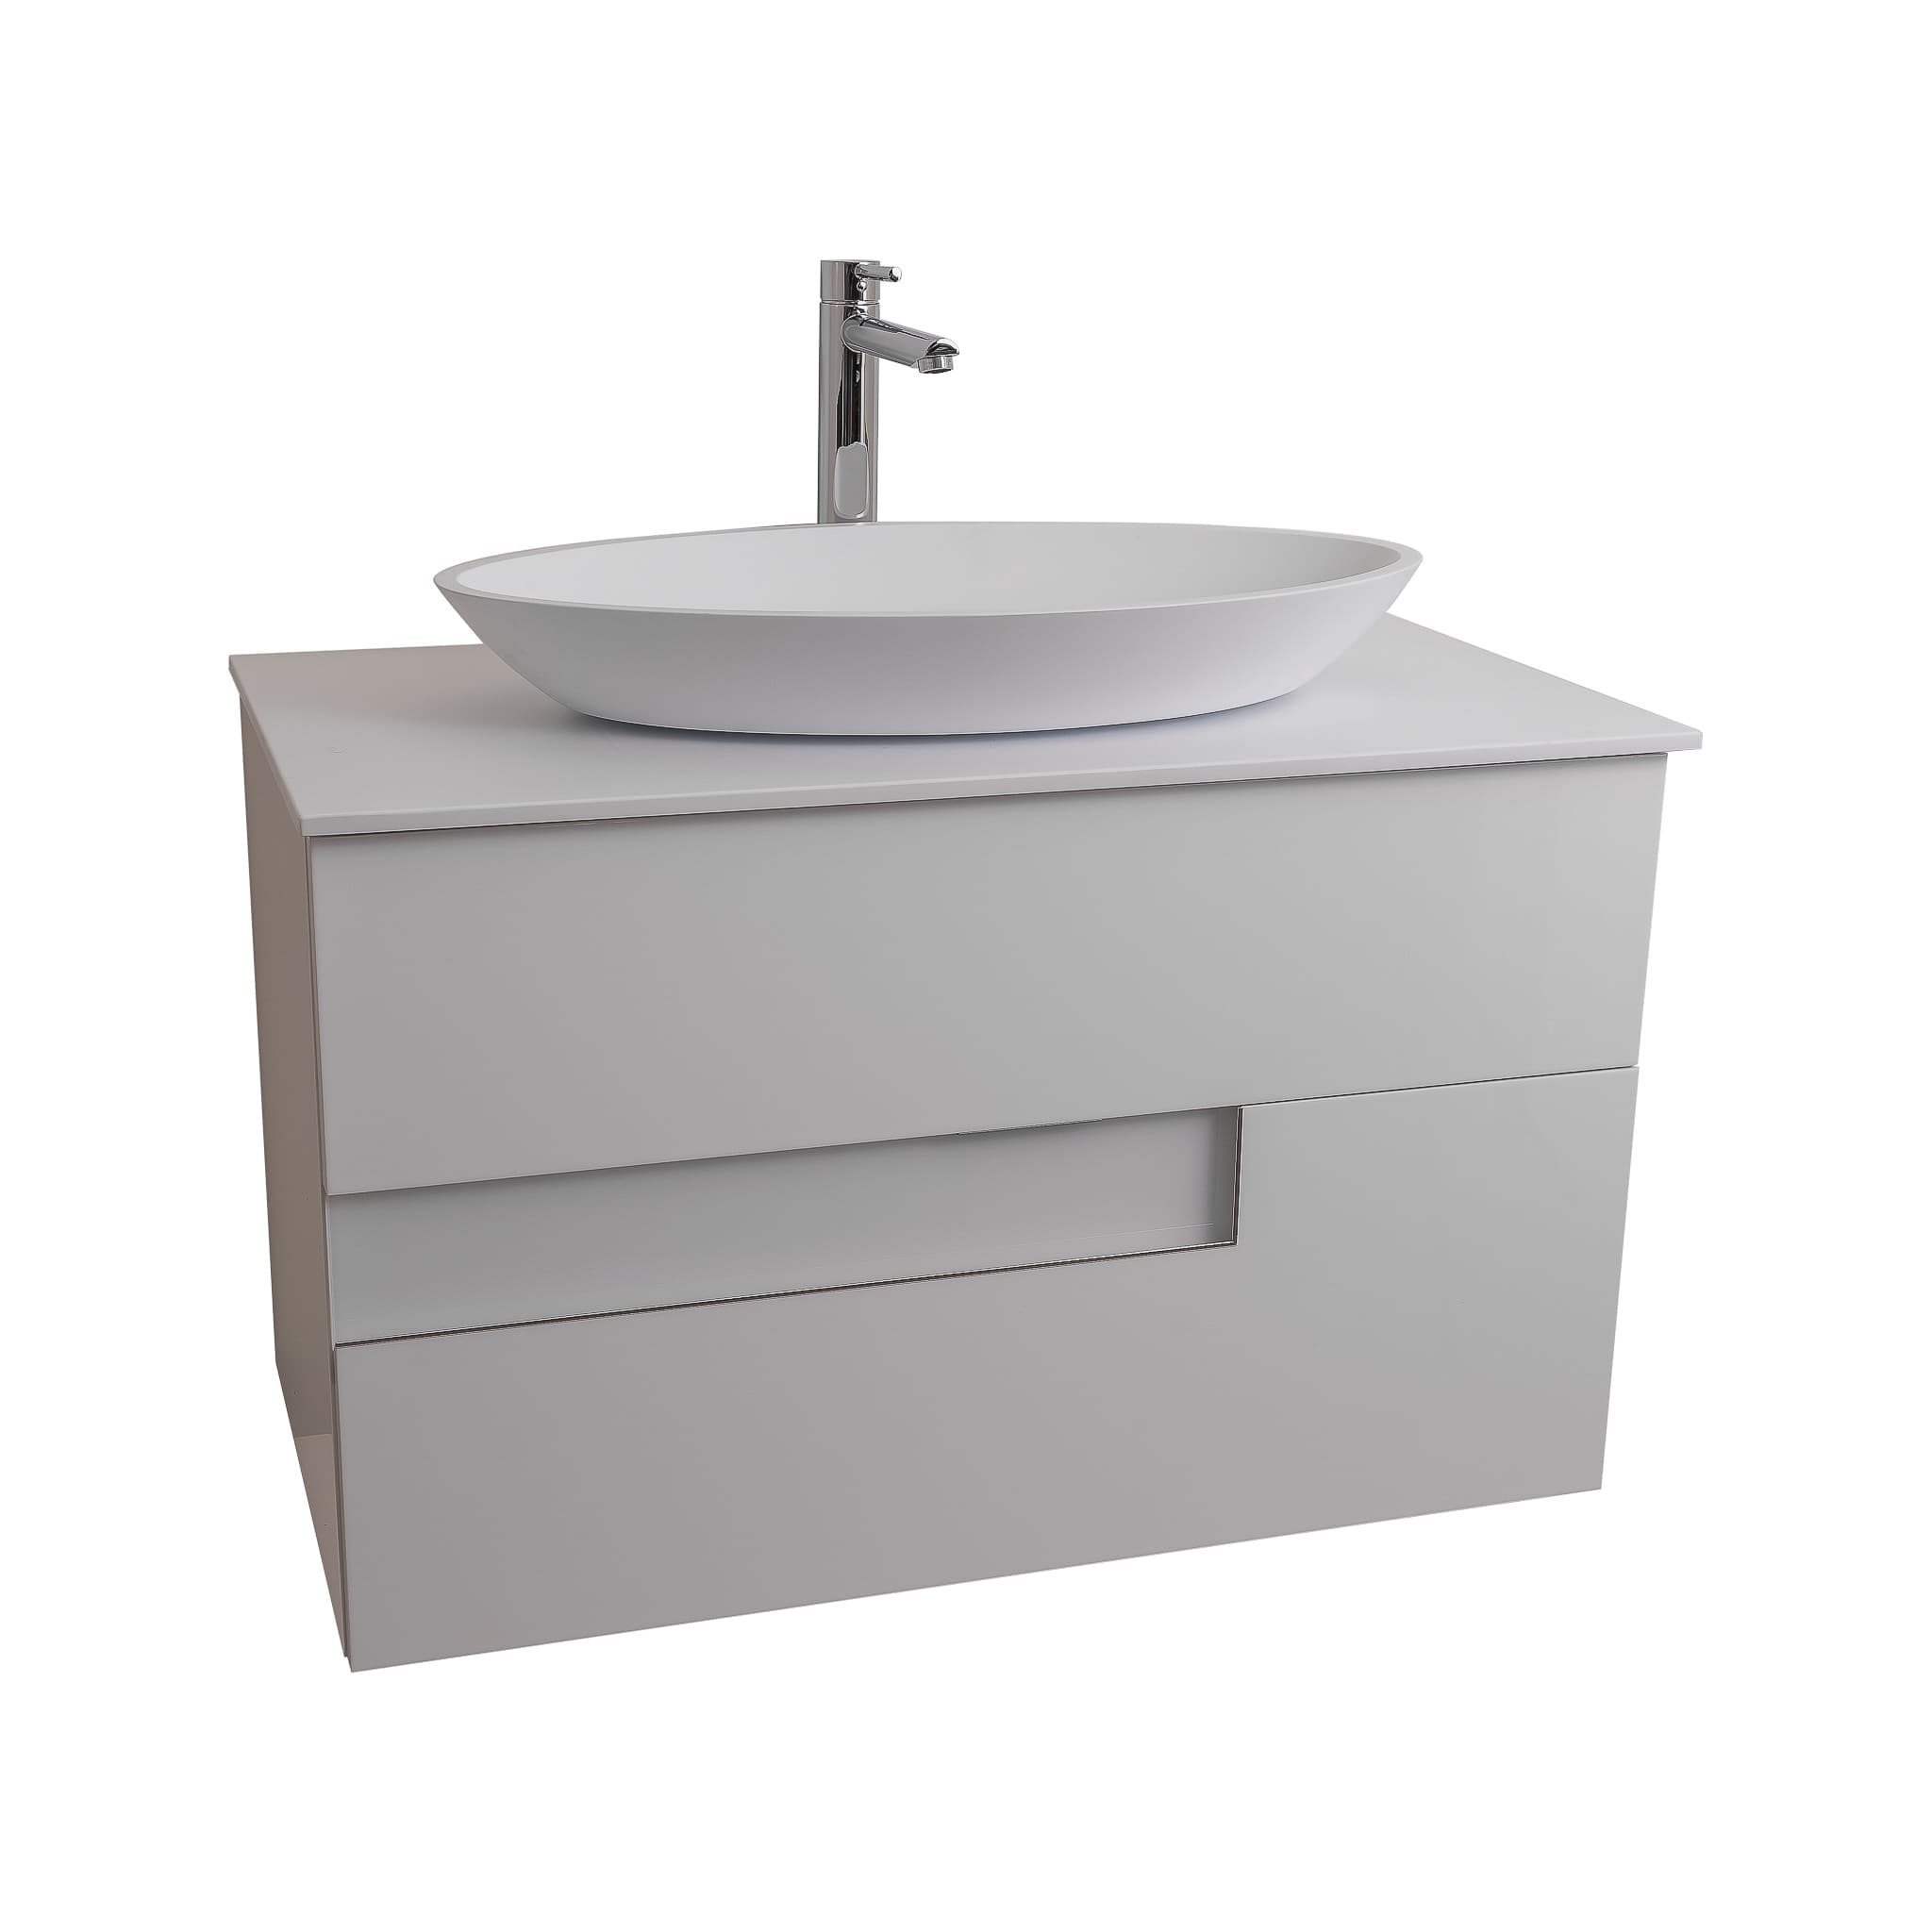 Vision 31.5 White High Gloss Cabinet, Solid Surface Flat White Counter And Oval Solid Surface White Basin 1305, Wall Mounted Modern Vanity Set